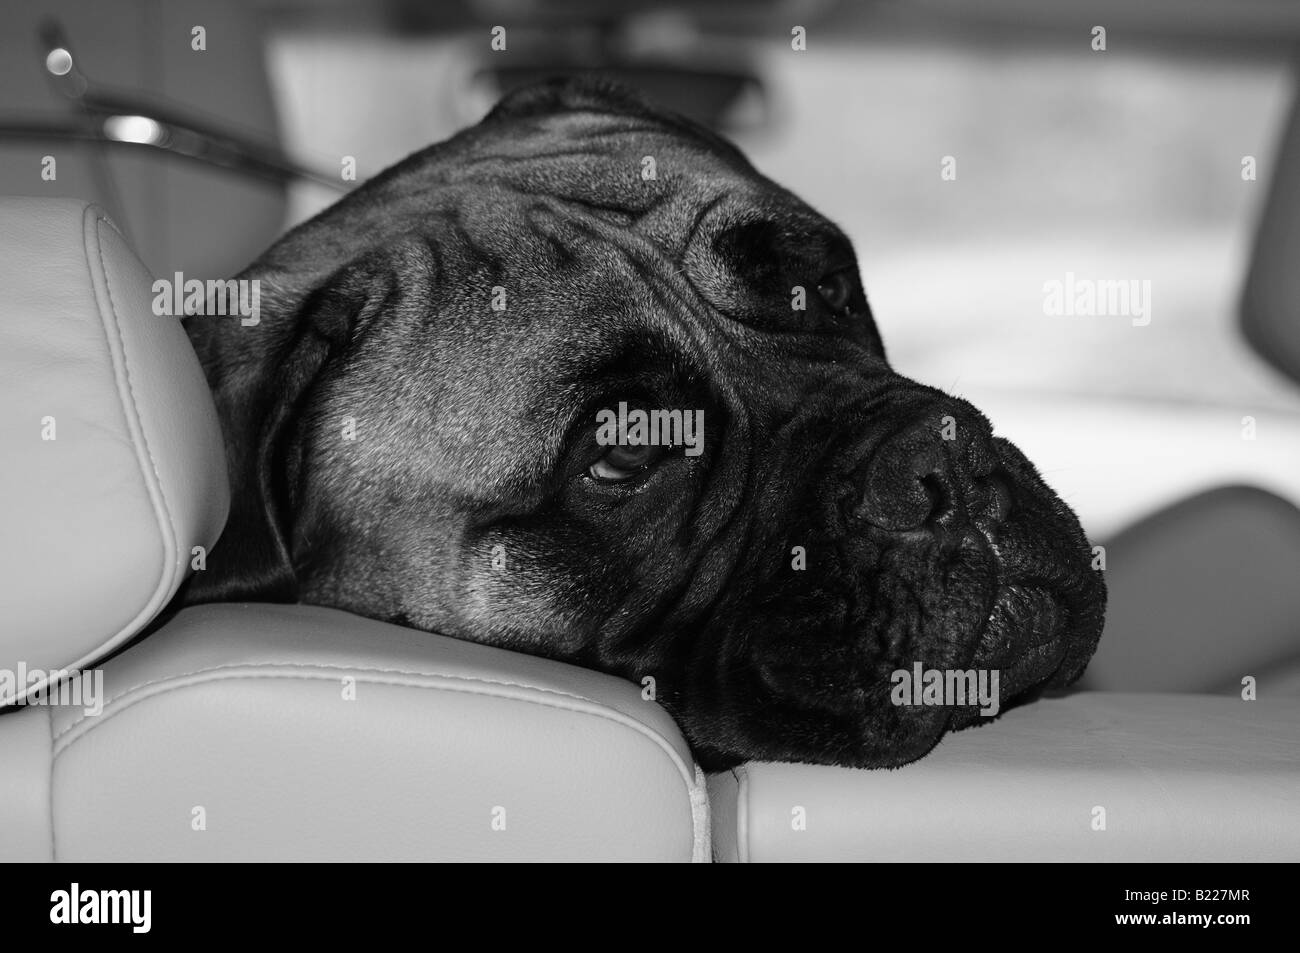 A bullmastiff (bull mastiff) dog peering its head over the back of the leather seats of a car, as its owner walks off. Stock Photo